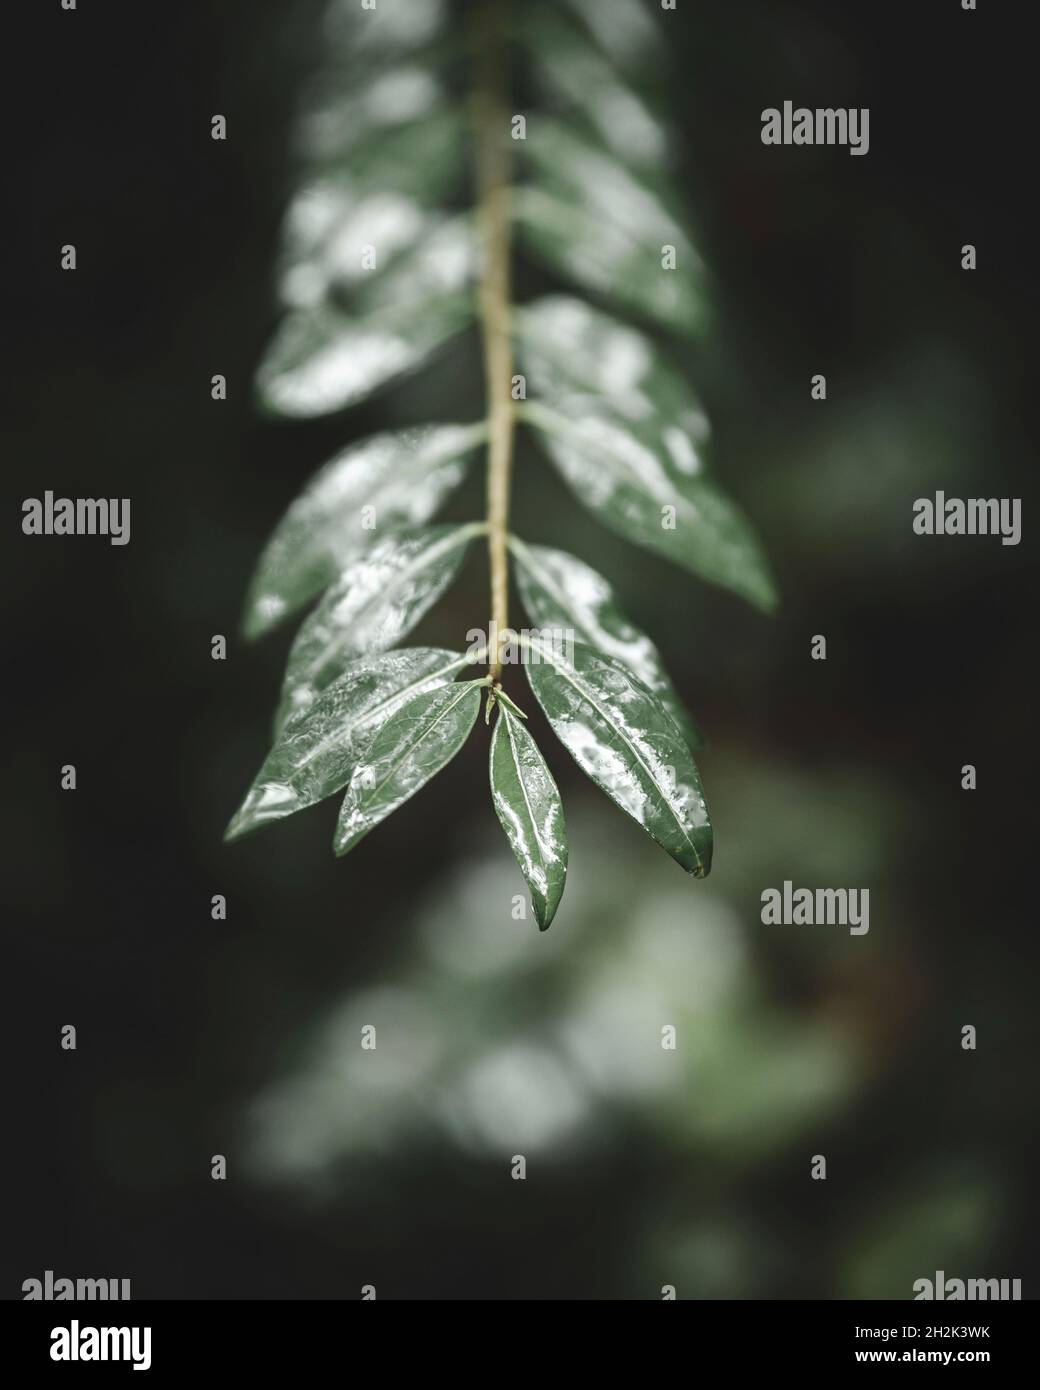 Close-up Of Fern Leaves Against Black Background Stock Photo